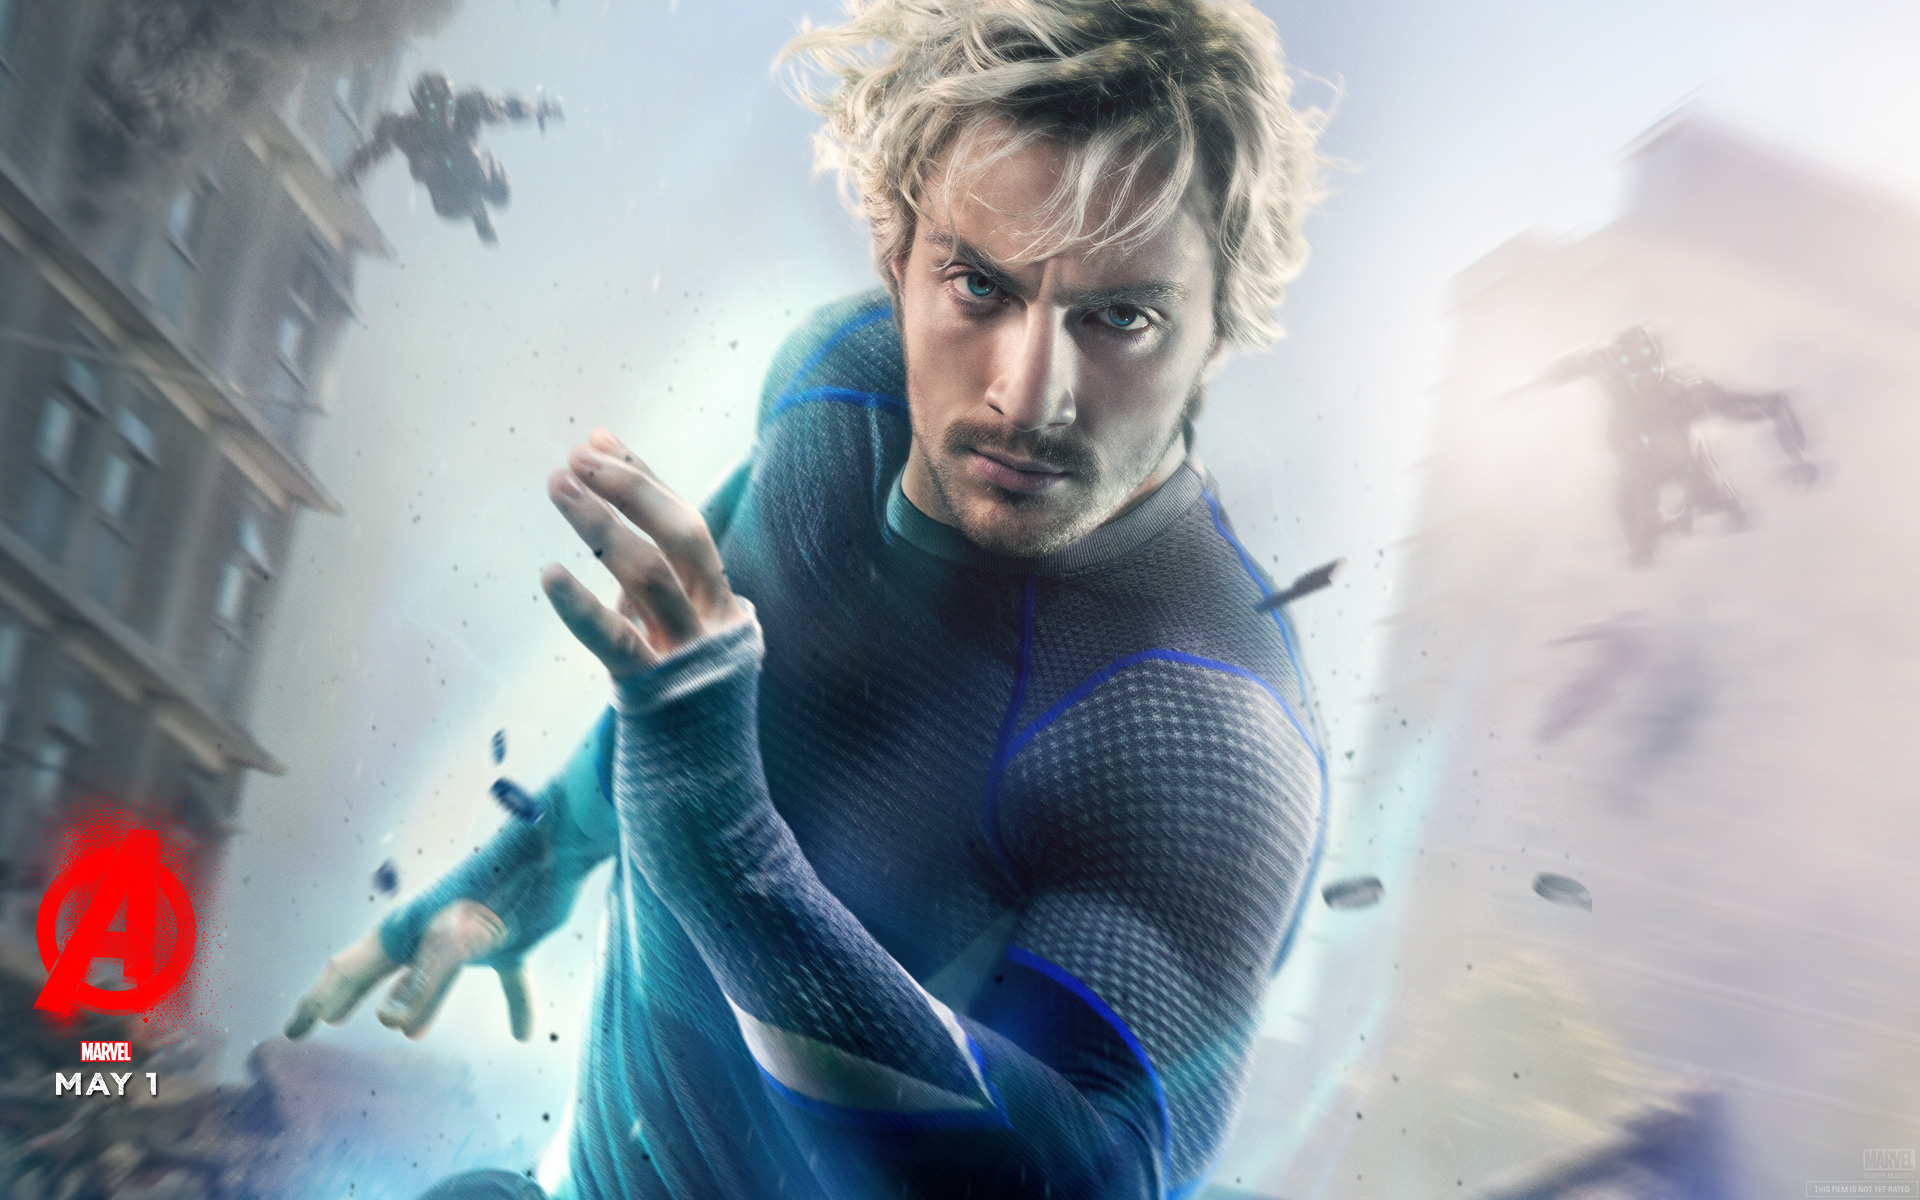 Gallery Image 1 - Quicksilver Avengers 2 , HD Wallpaper & Backgrounds